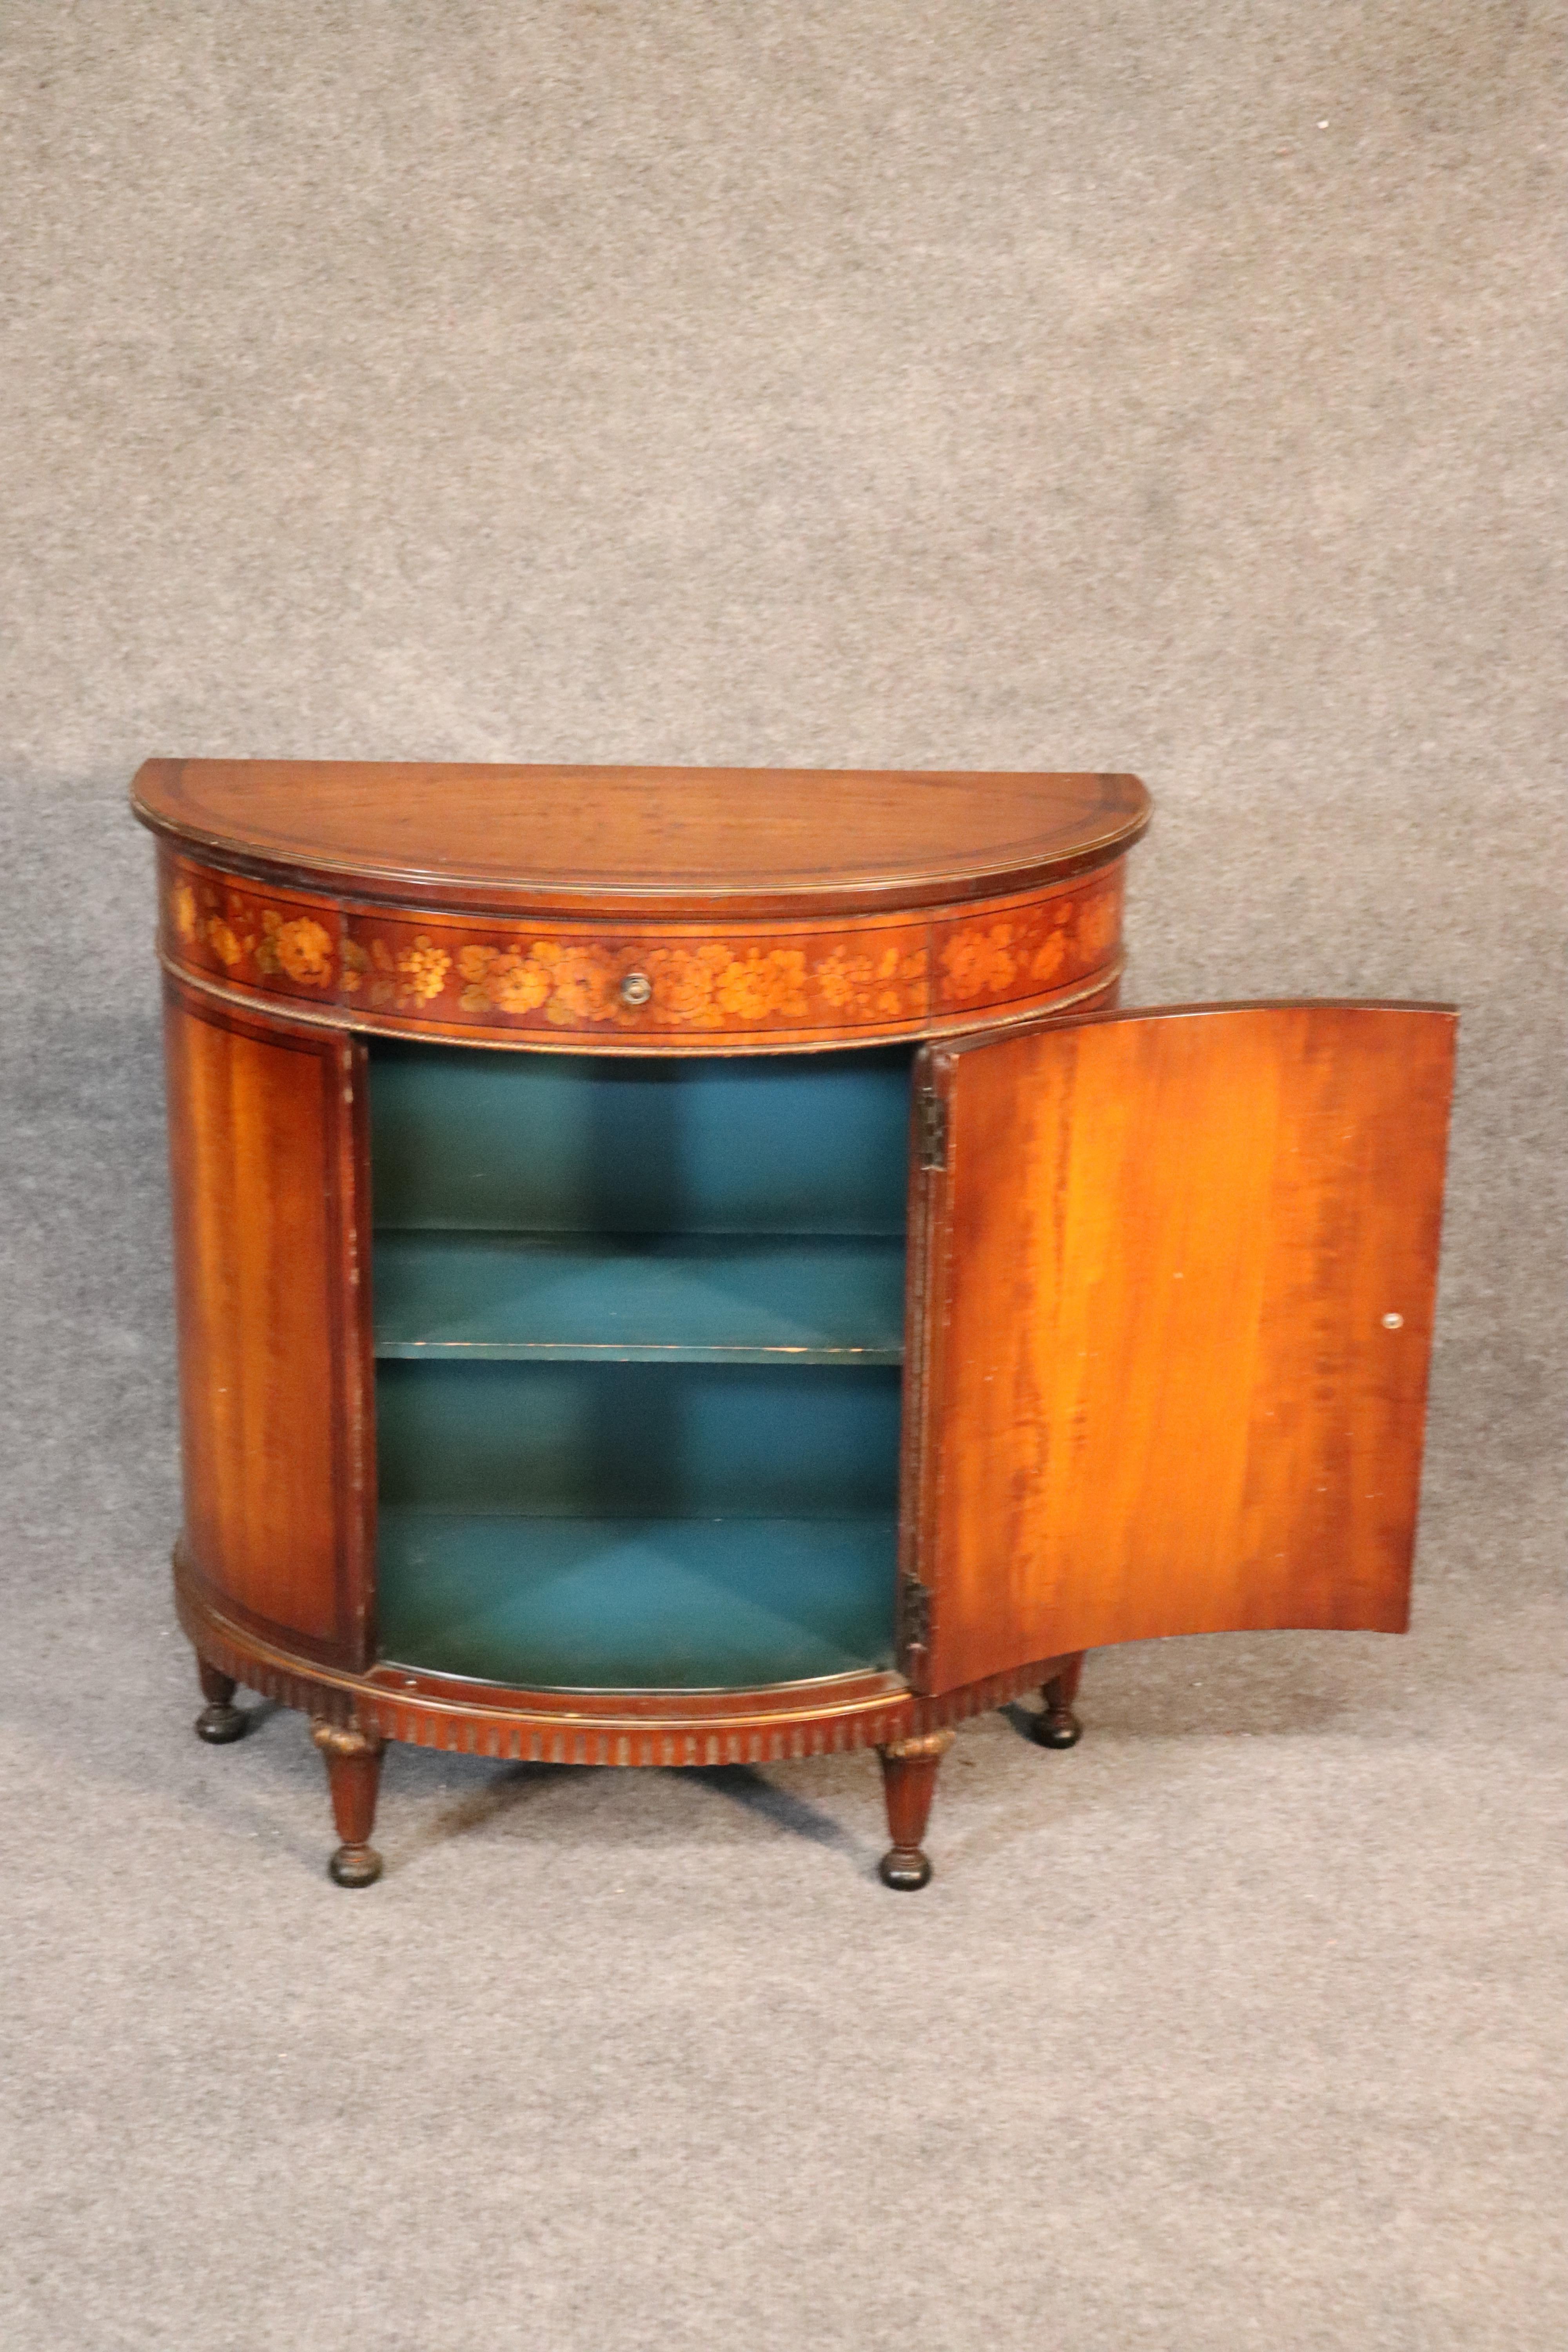 Early 20th Century Inlaid Satinwood Adams Style Demilune Commode Nightstand, circa 1920s